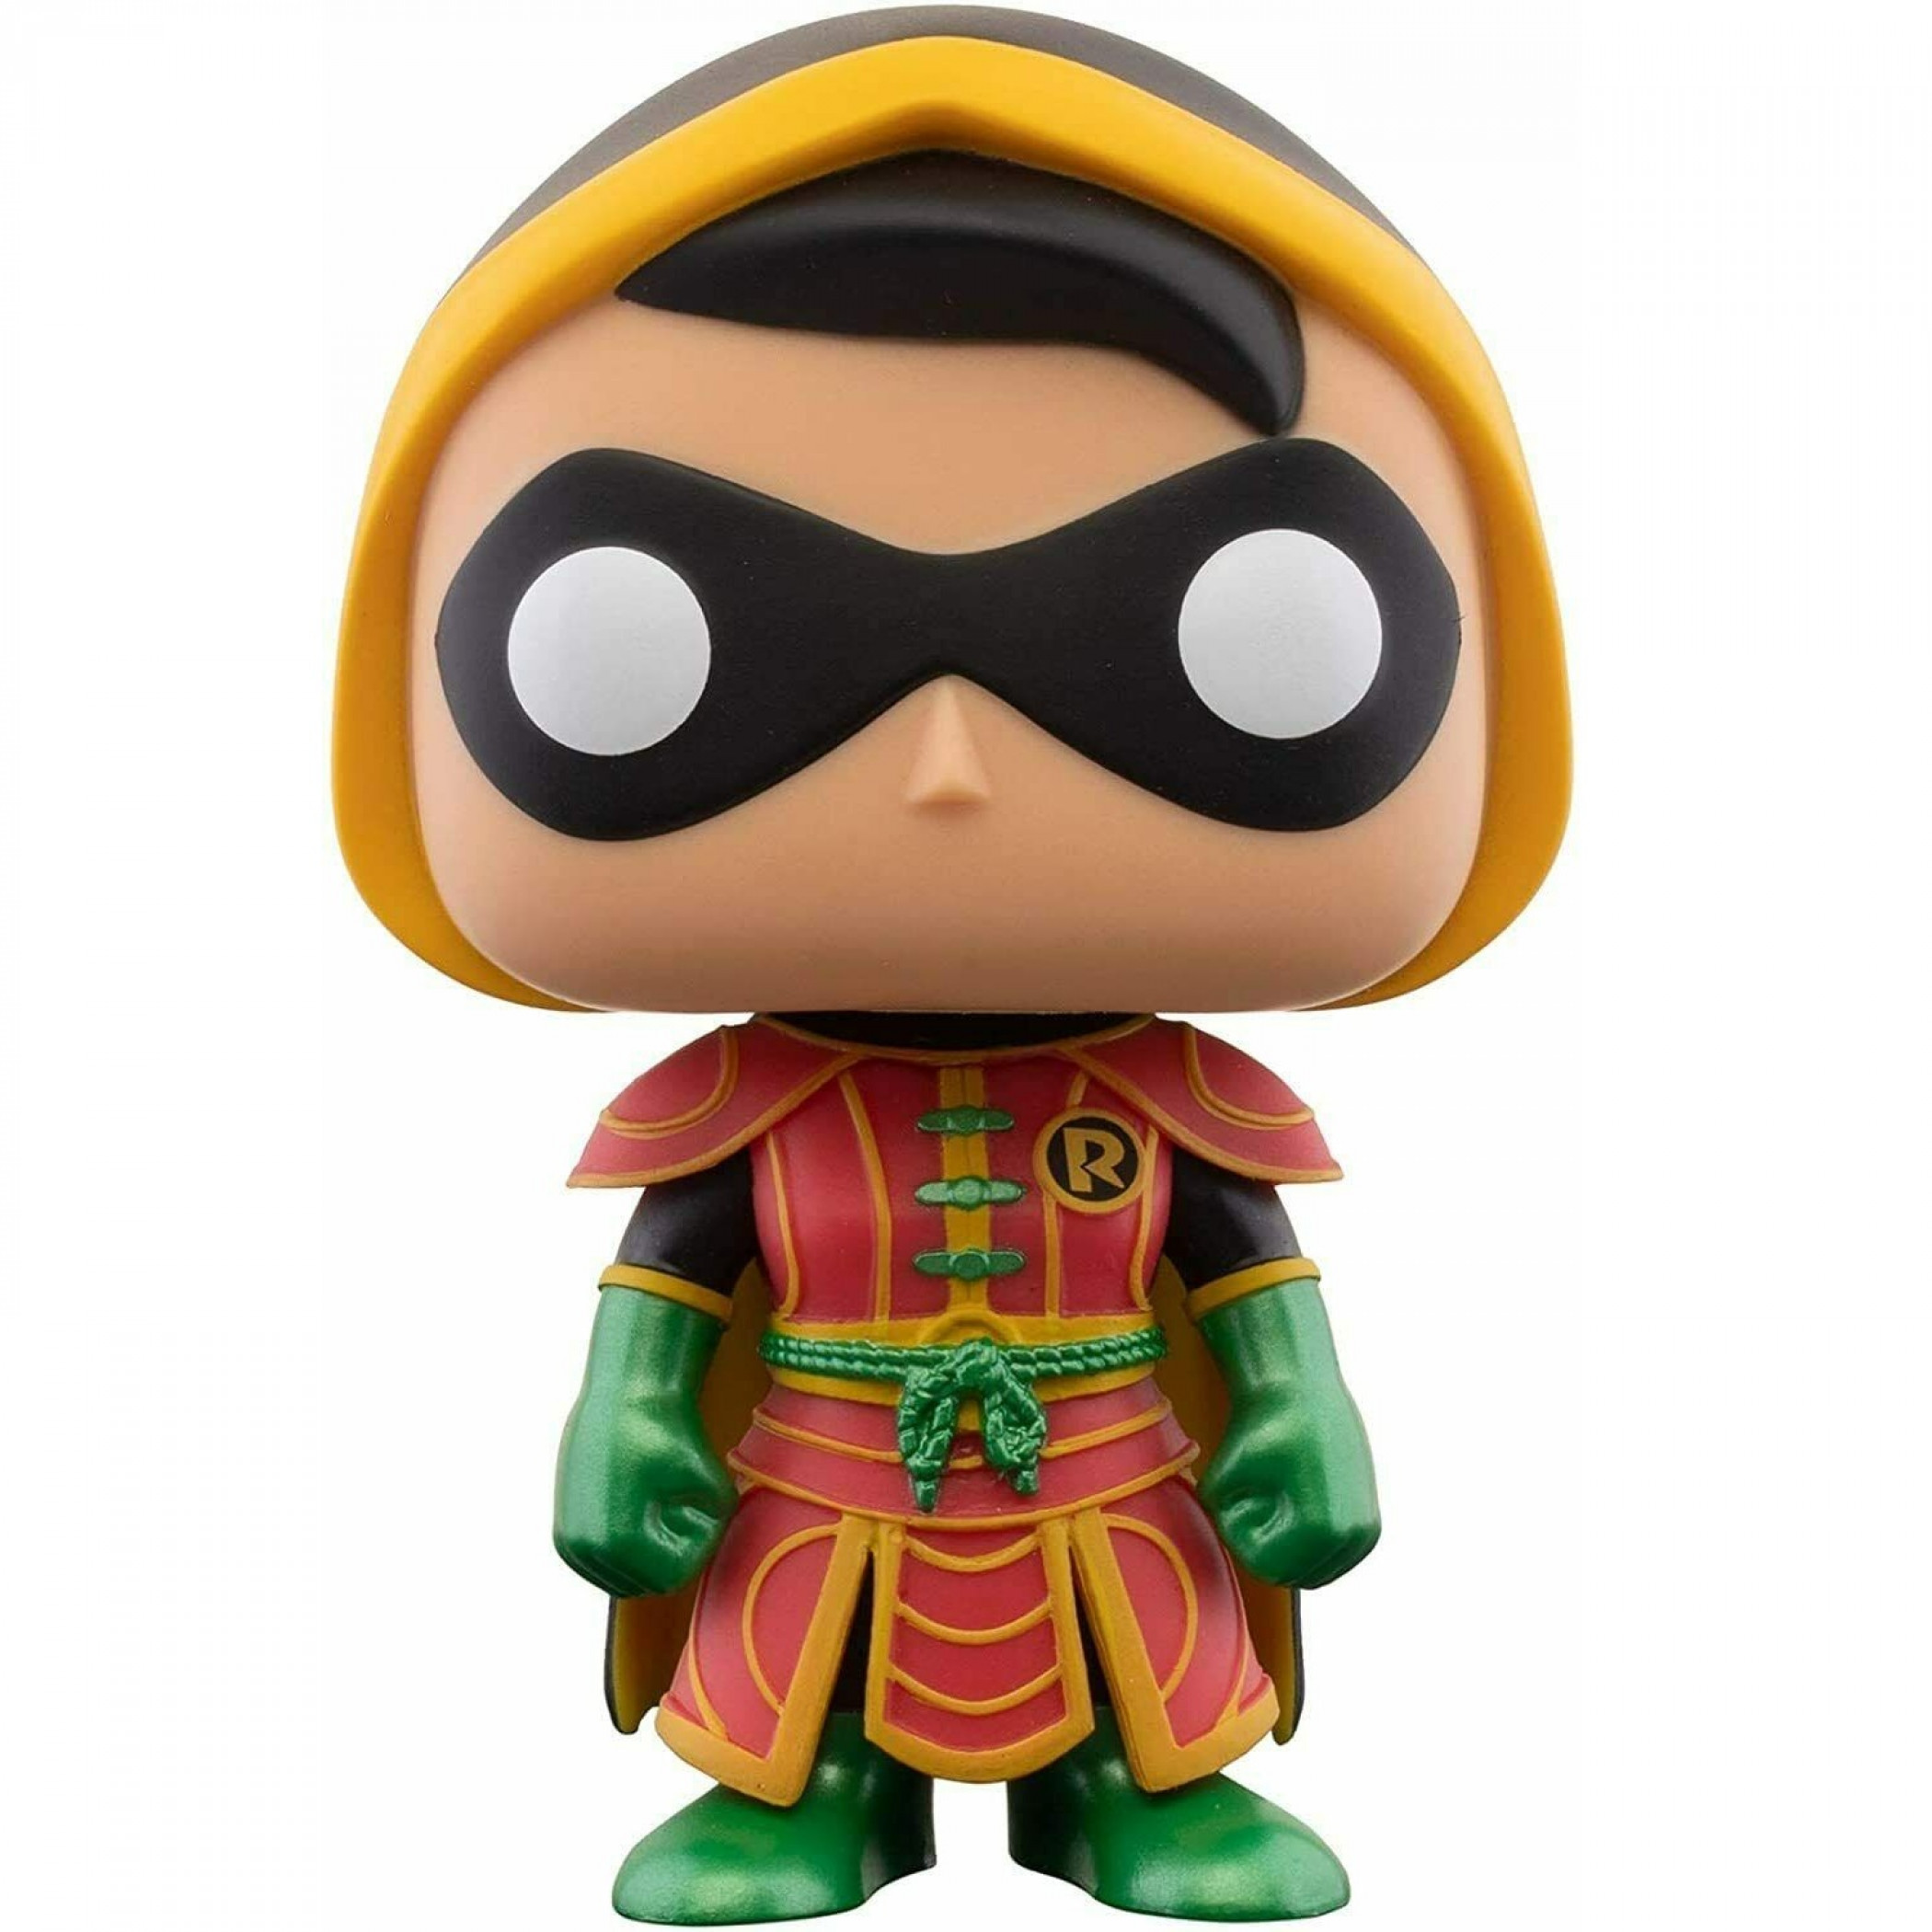 Robin Imperial Palace Funko Pop! Vinyl Figure Chase Variant